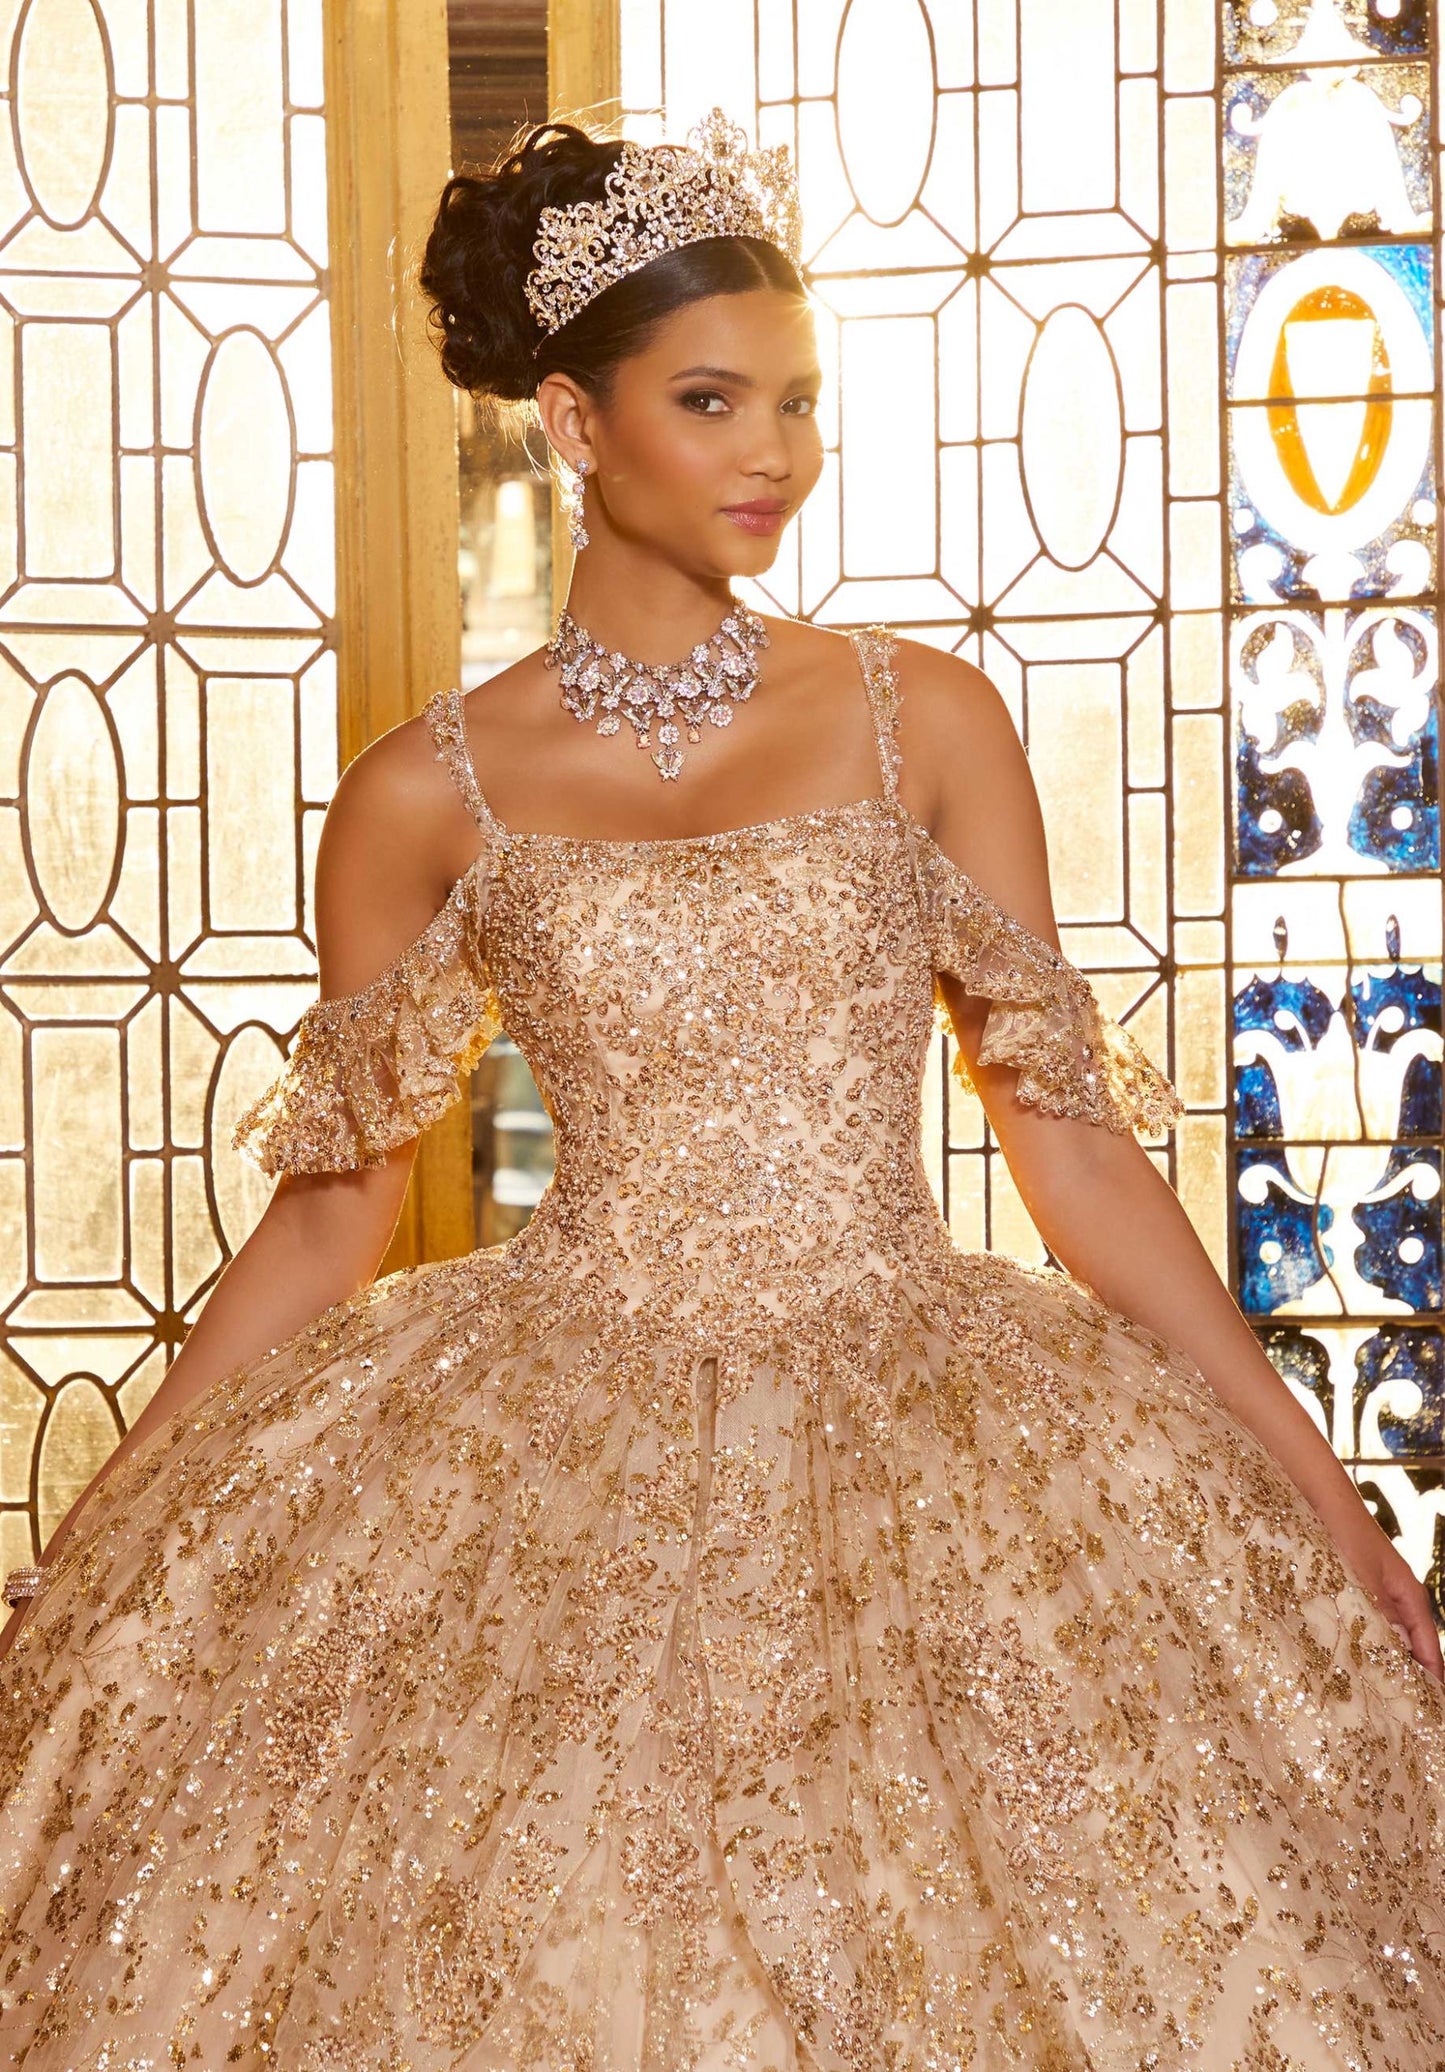 Allover Patterned Sequined Quinceañera Dress #89346